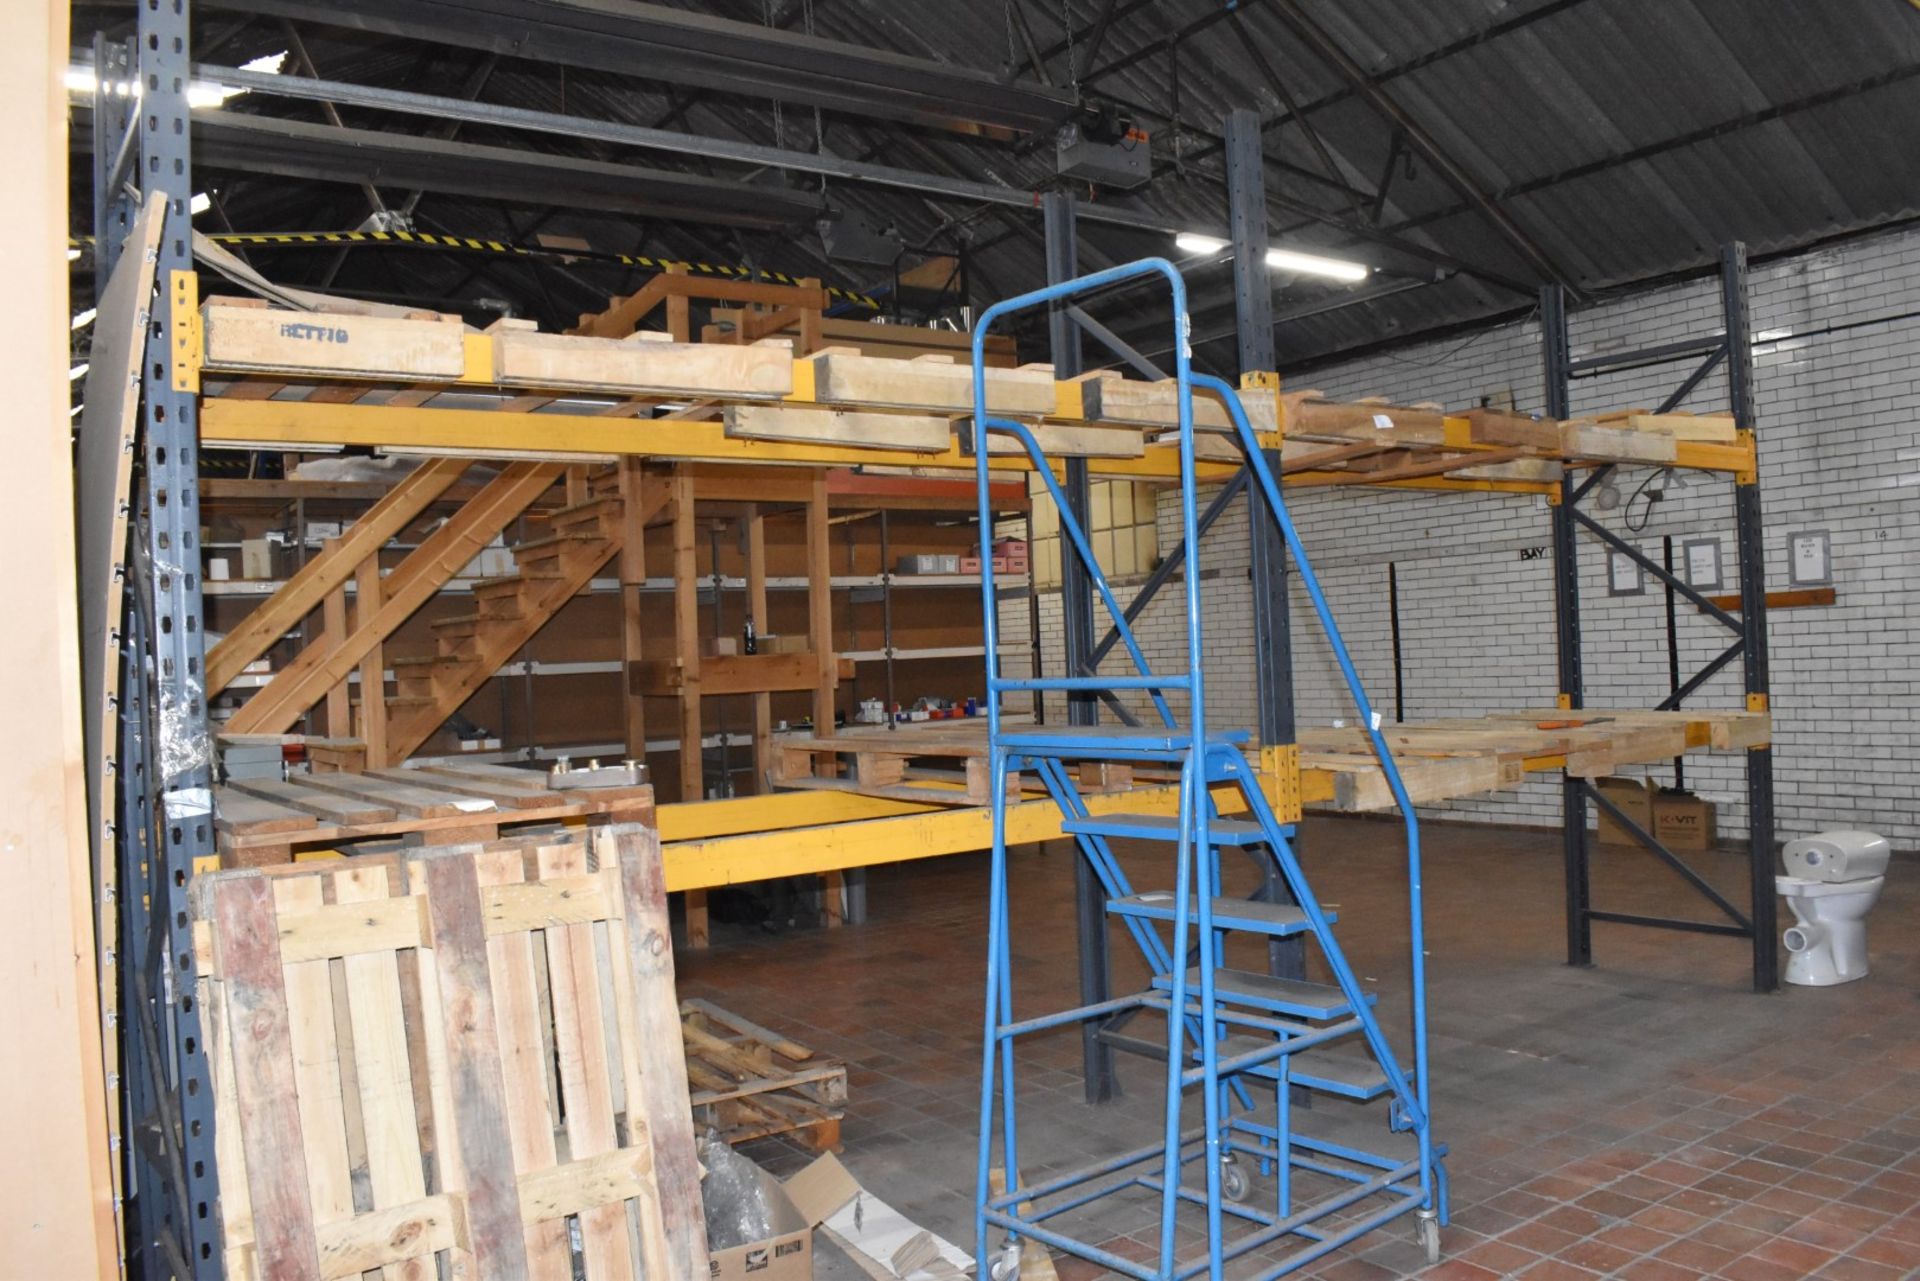 2 x Bays of Pallet Racking - Includes 3 x Uprights and 8 x Crossbeams - Size: H300 x W500 x D90cms - Image 5 of 5